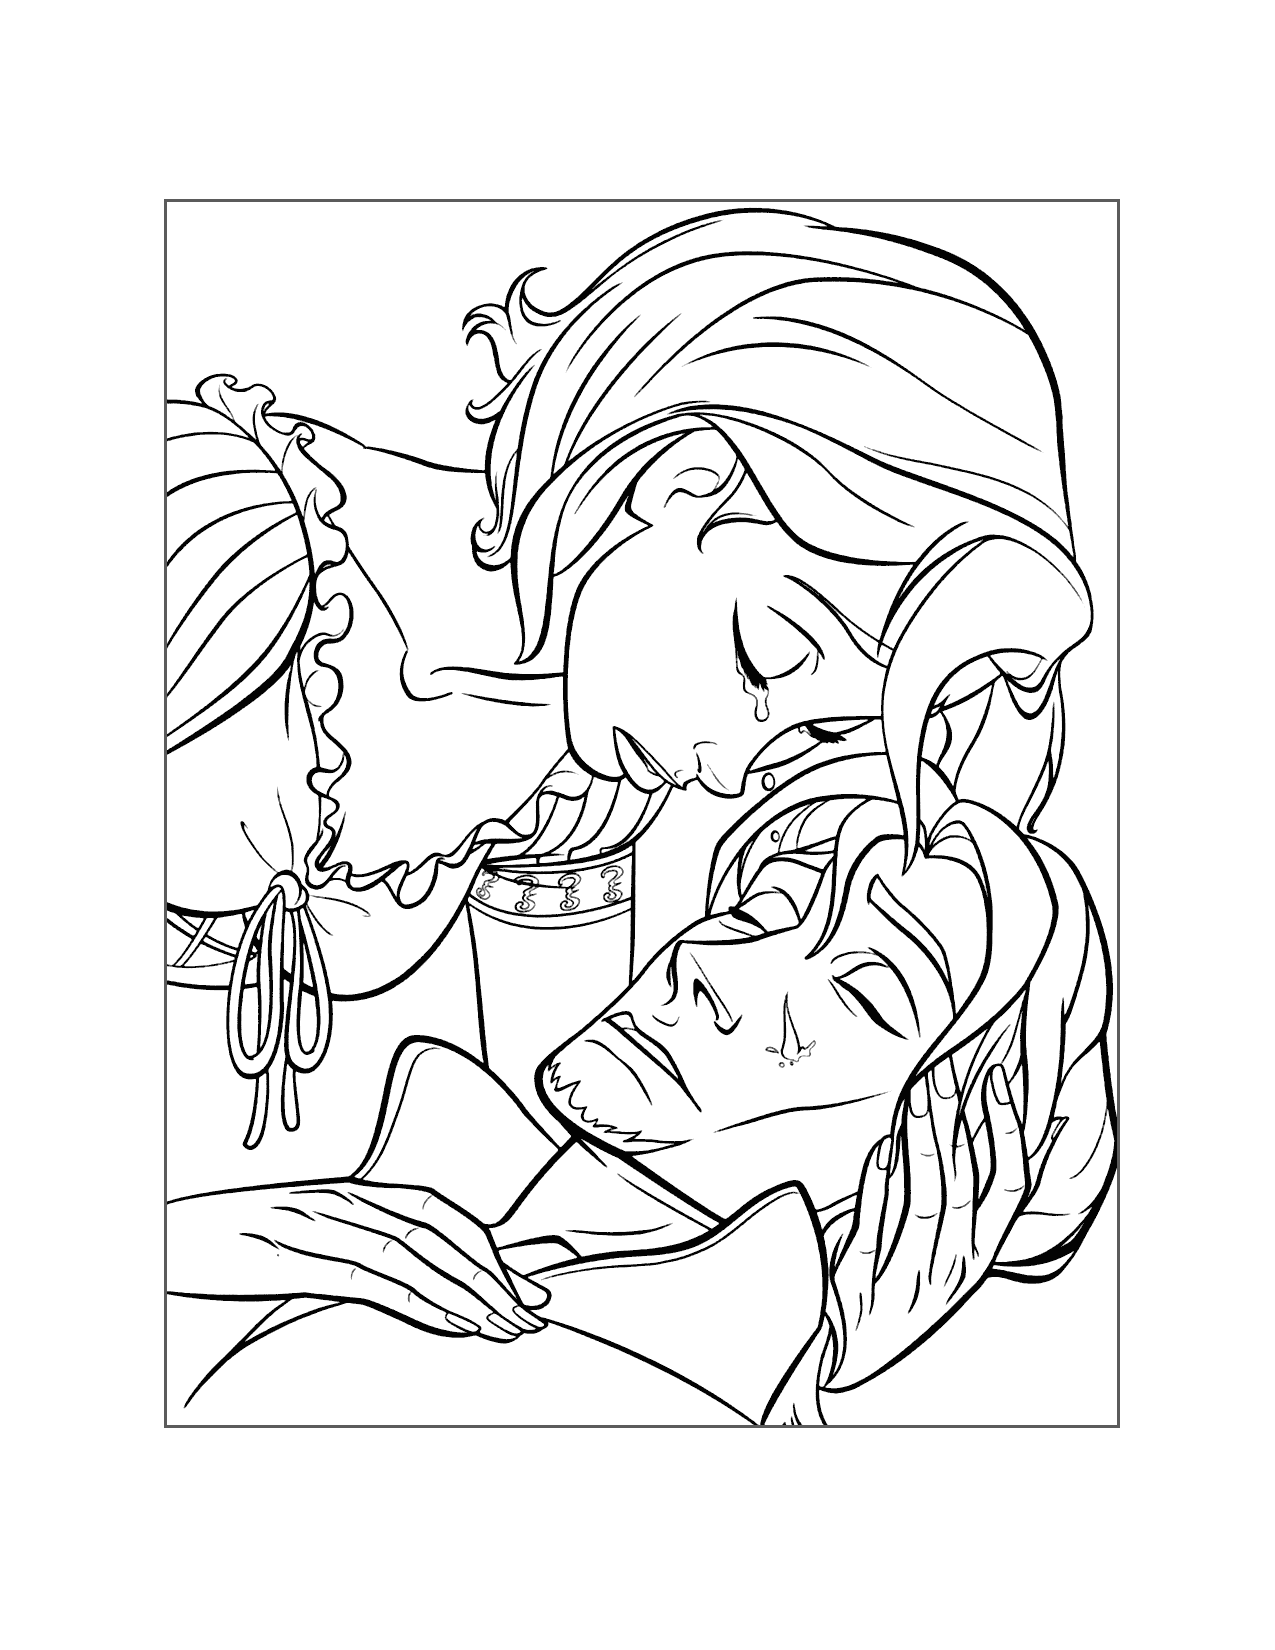 Rapunzel Helps Flynn Coloring Page